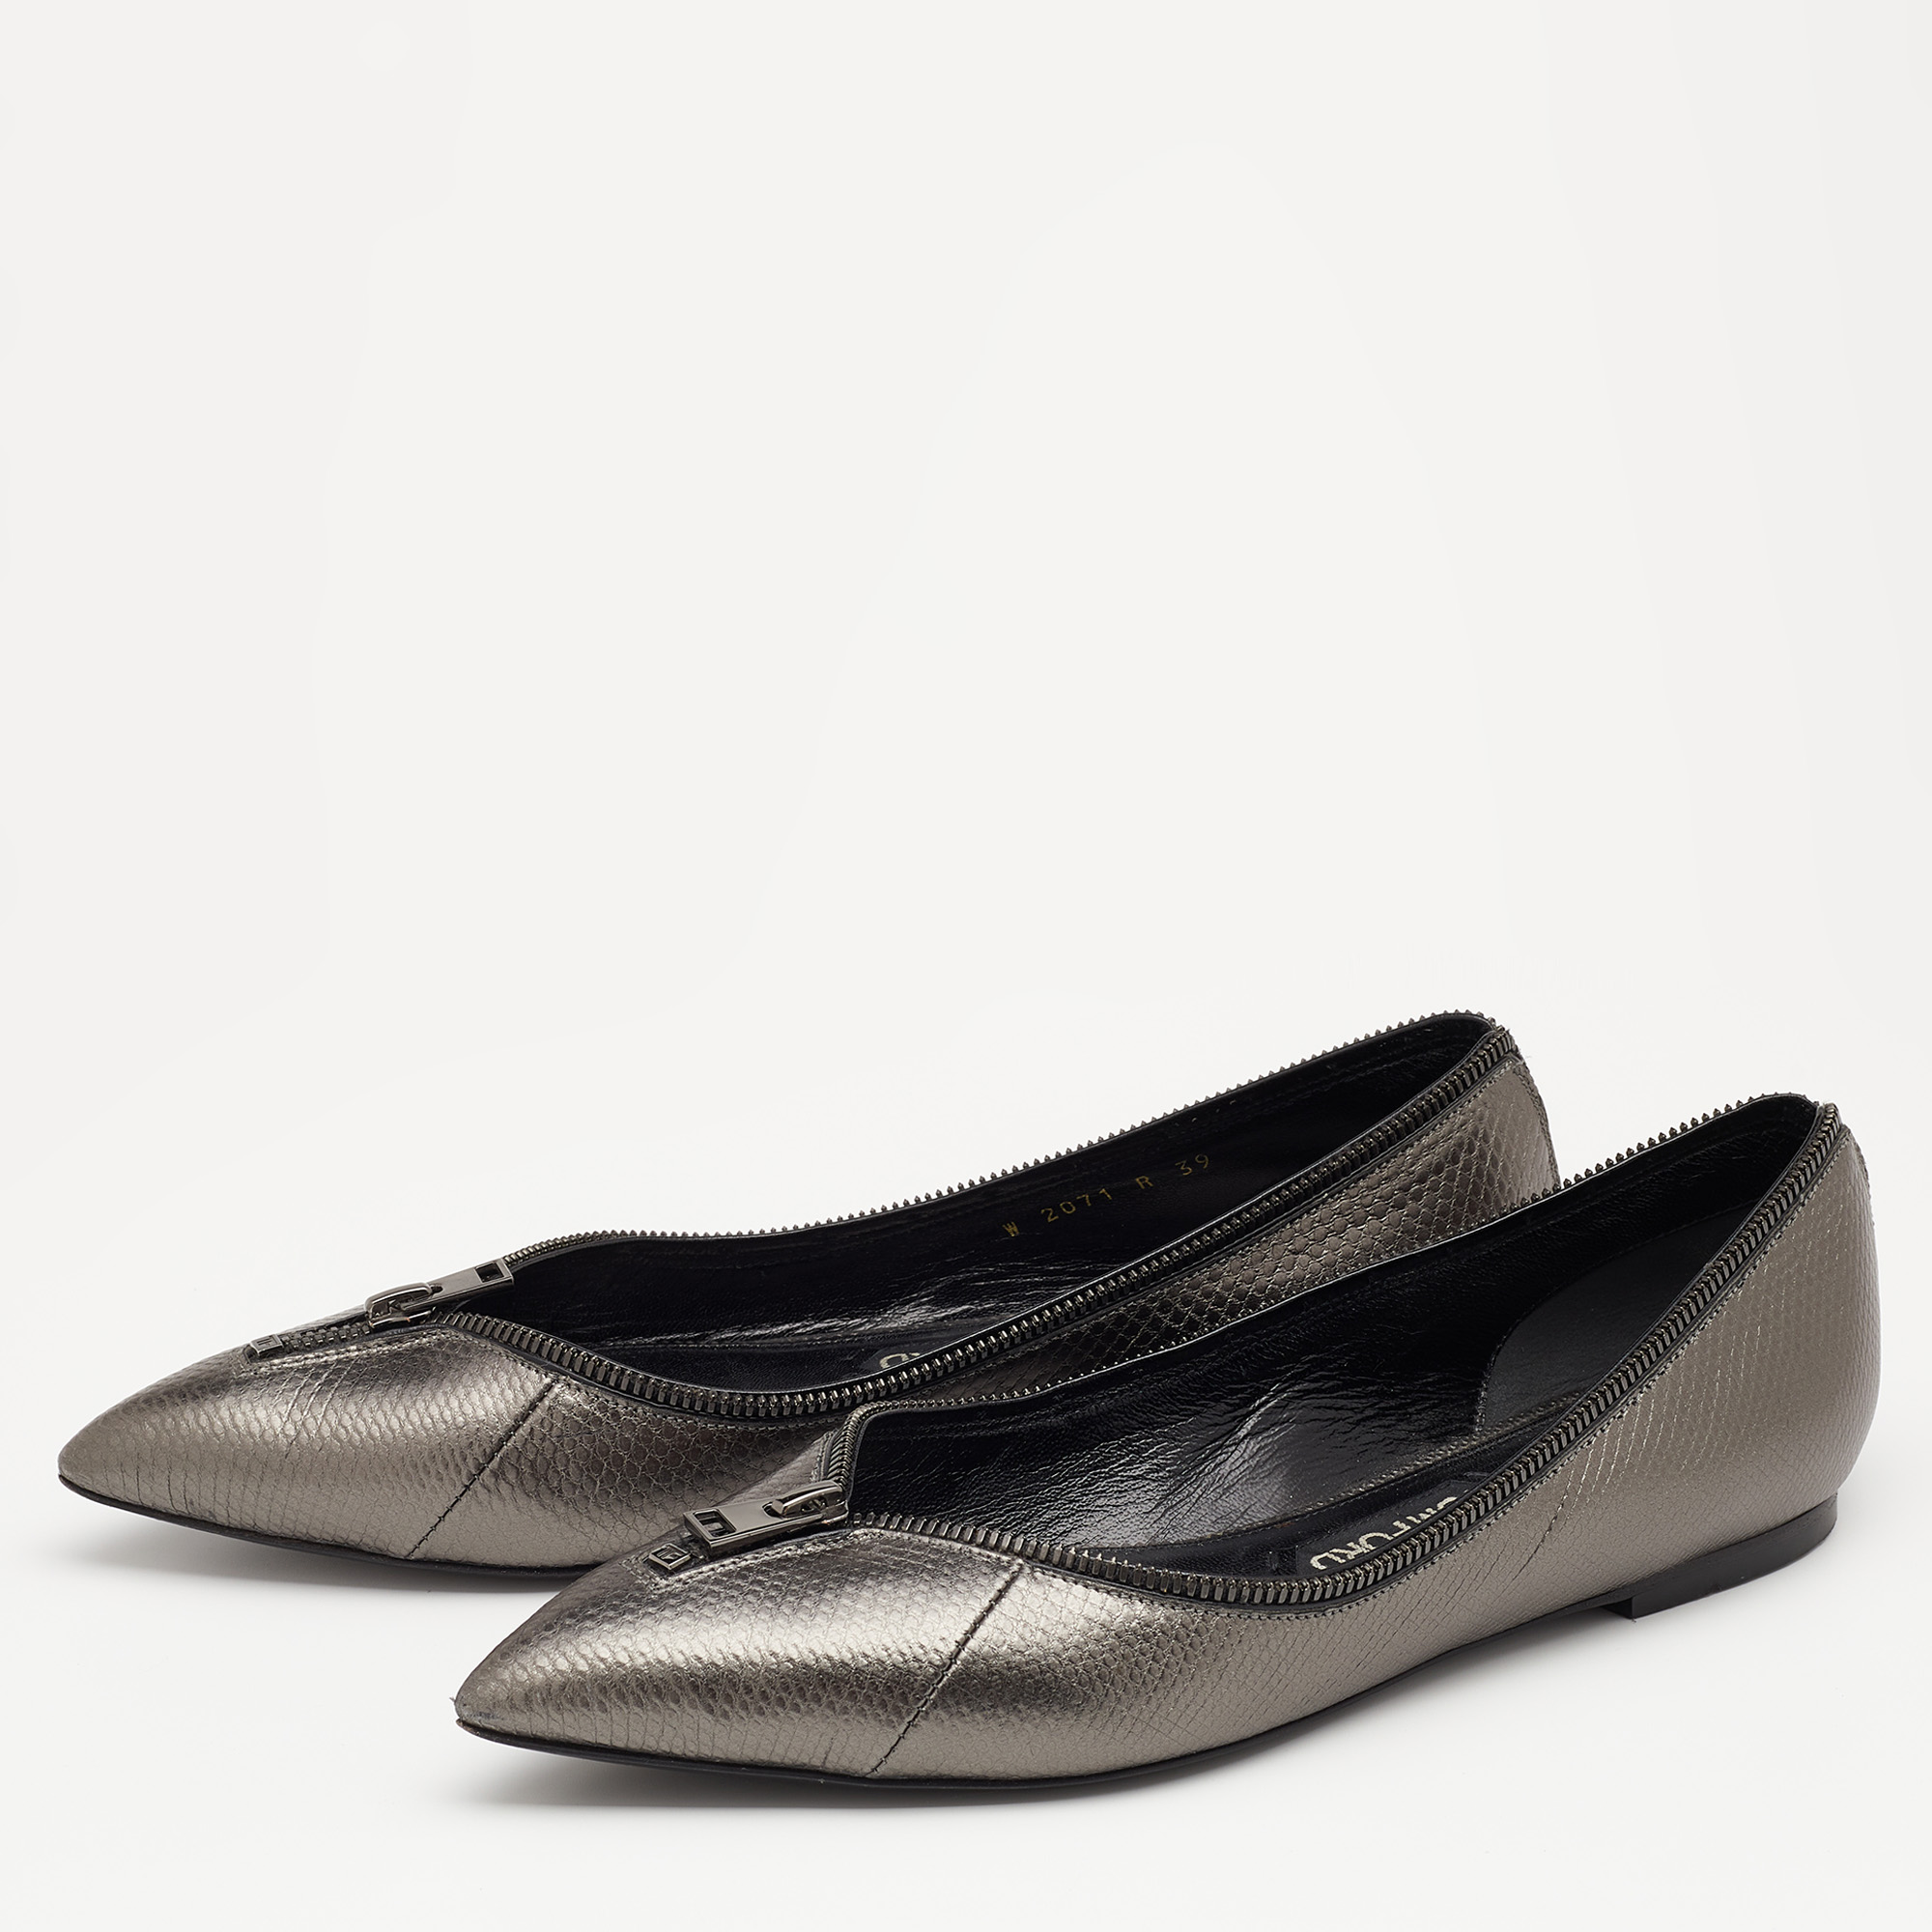 

Tom Ford Metallic Grey Karung Embossed Leather Zipper Pointed Toe Ballet Flats Size